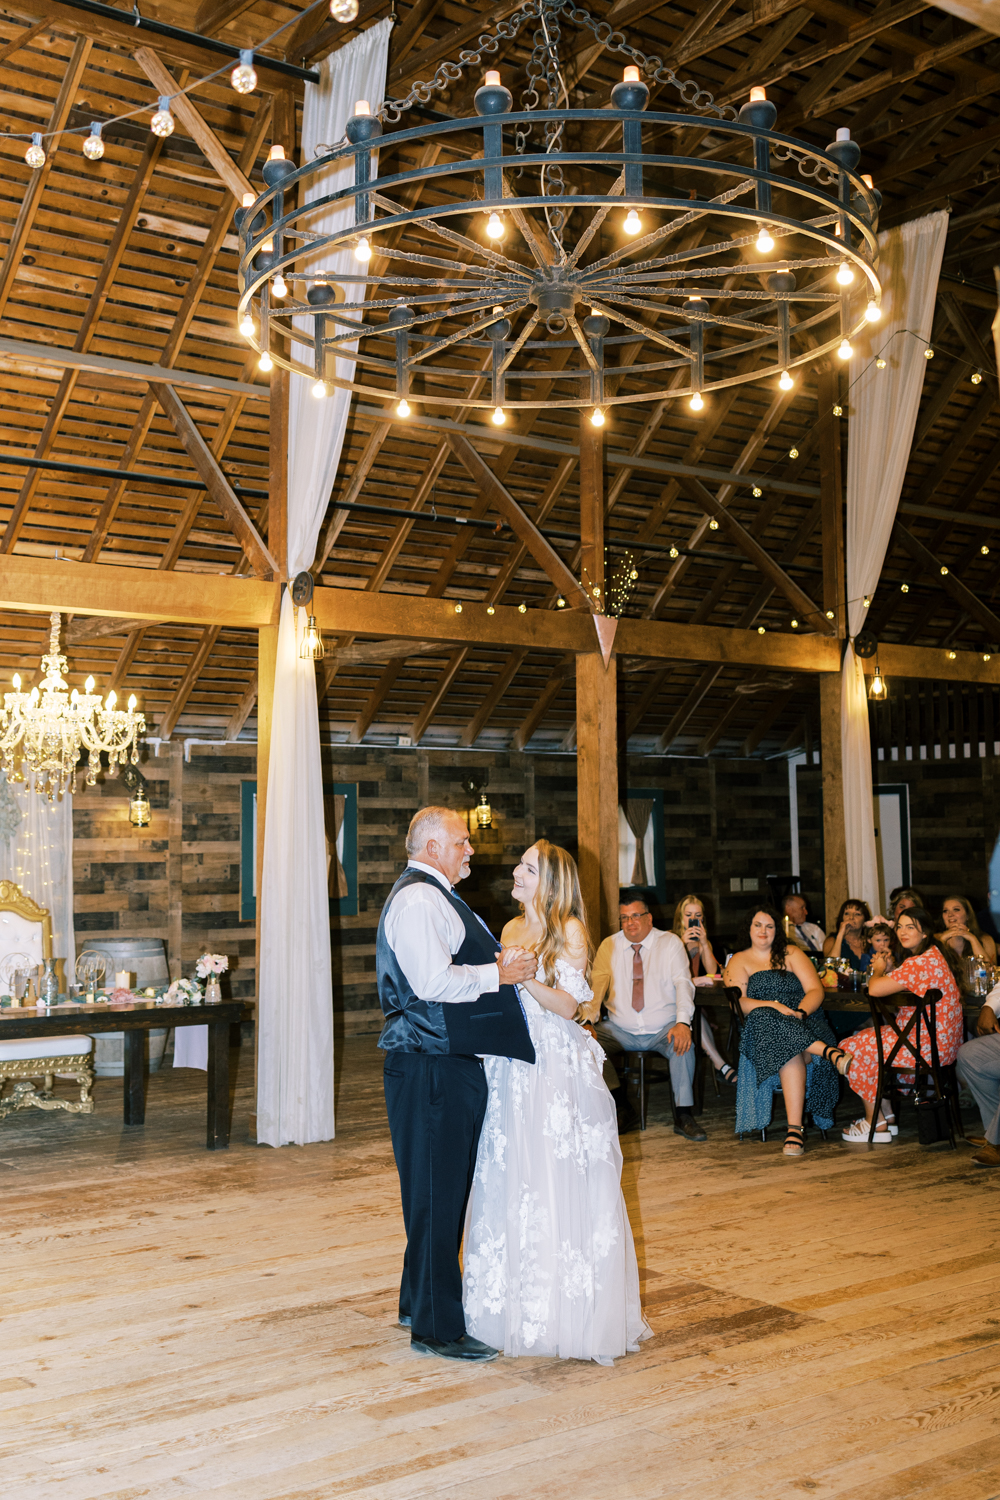 bride dancing with her father at barn wedding reception